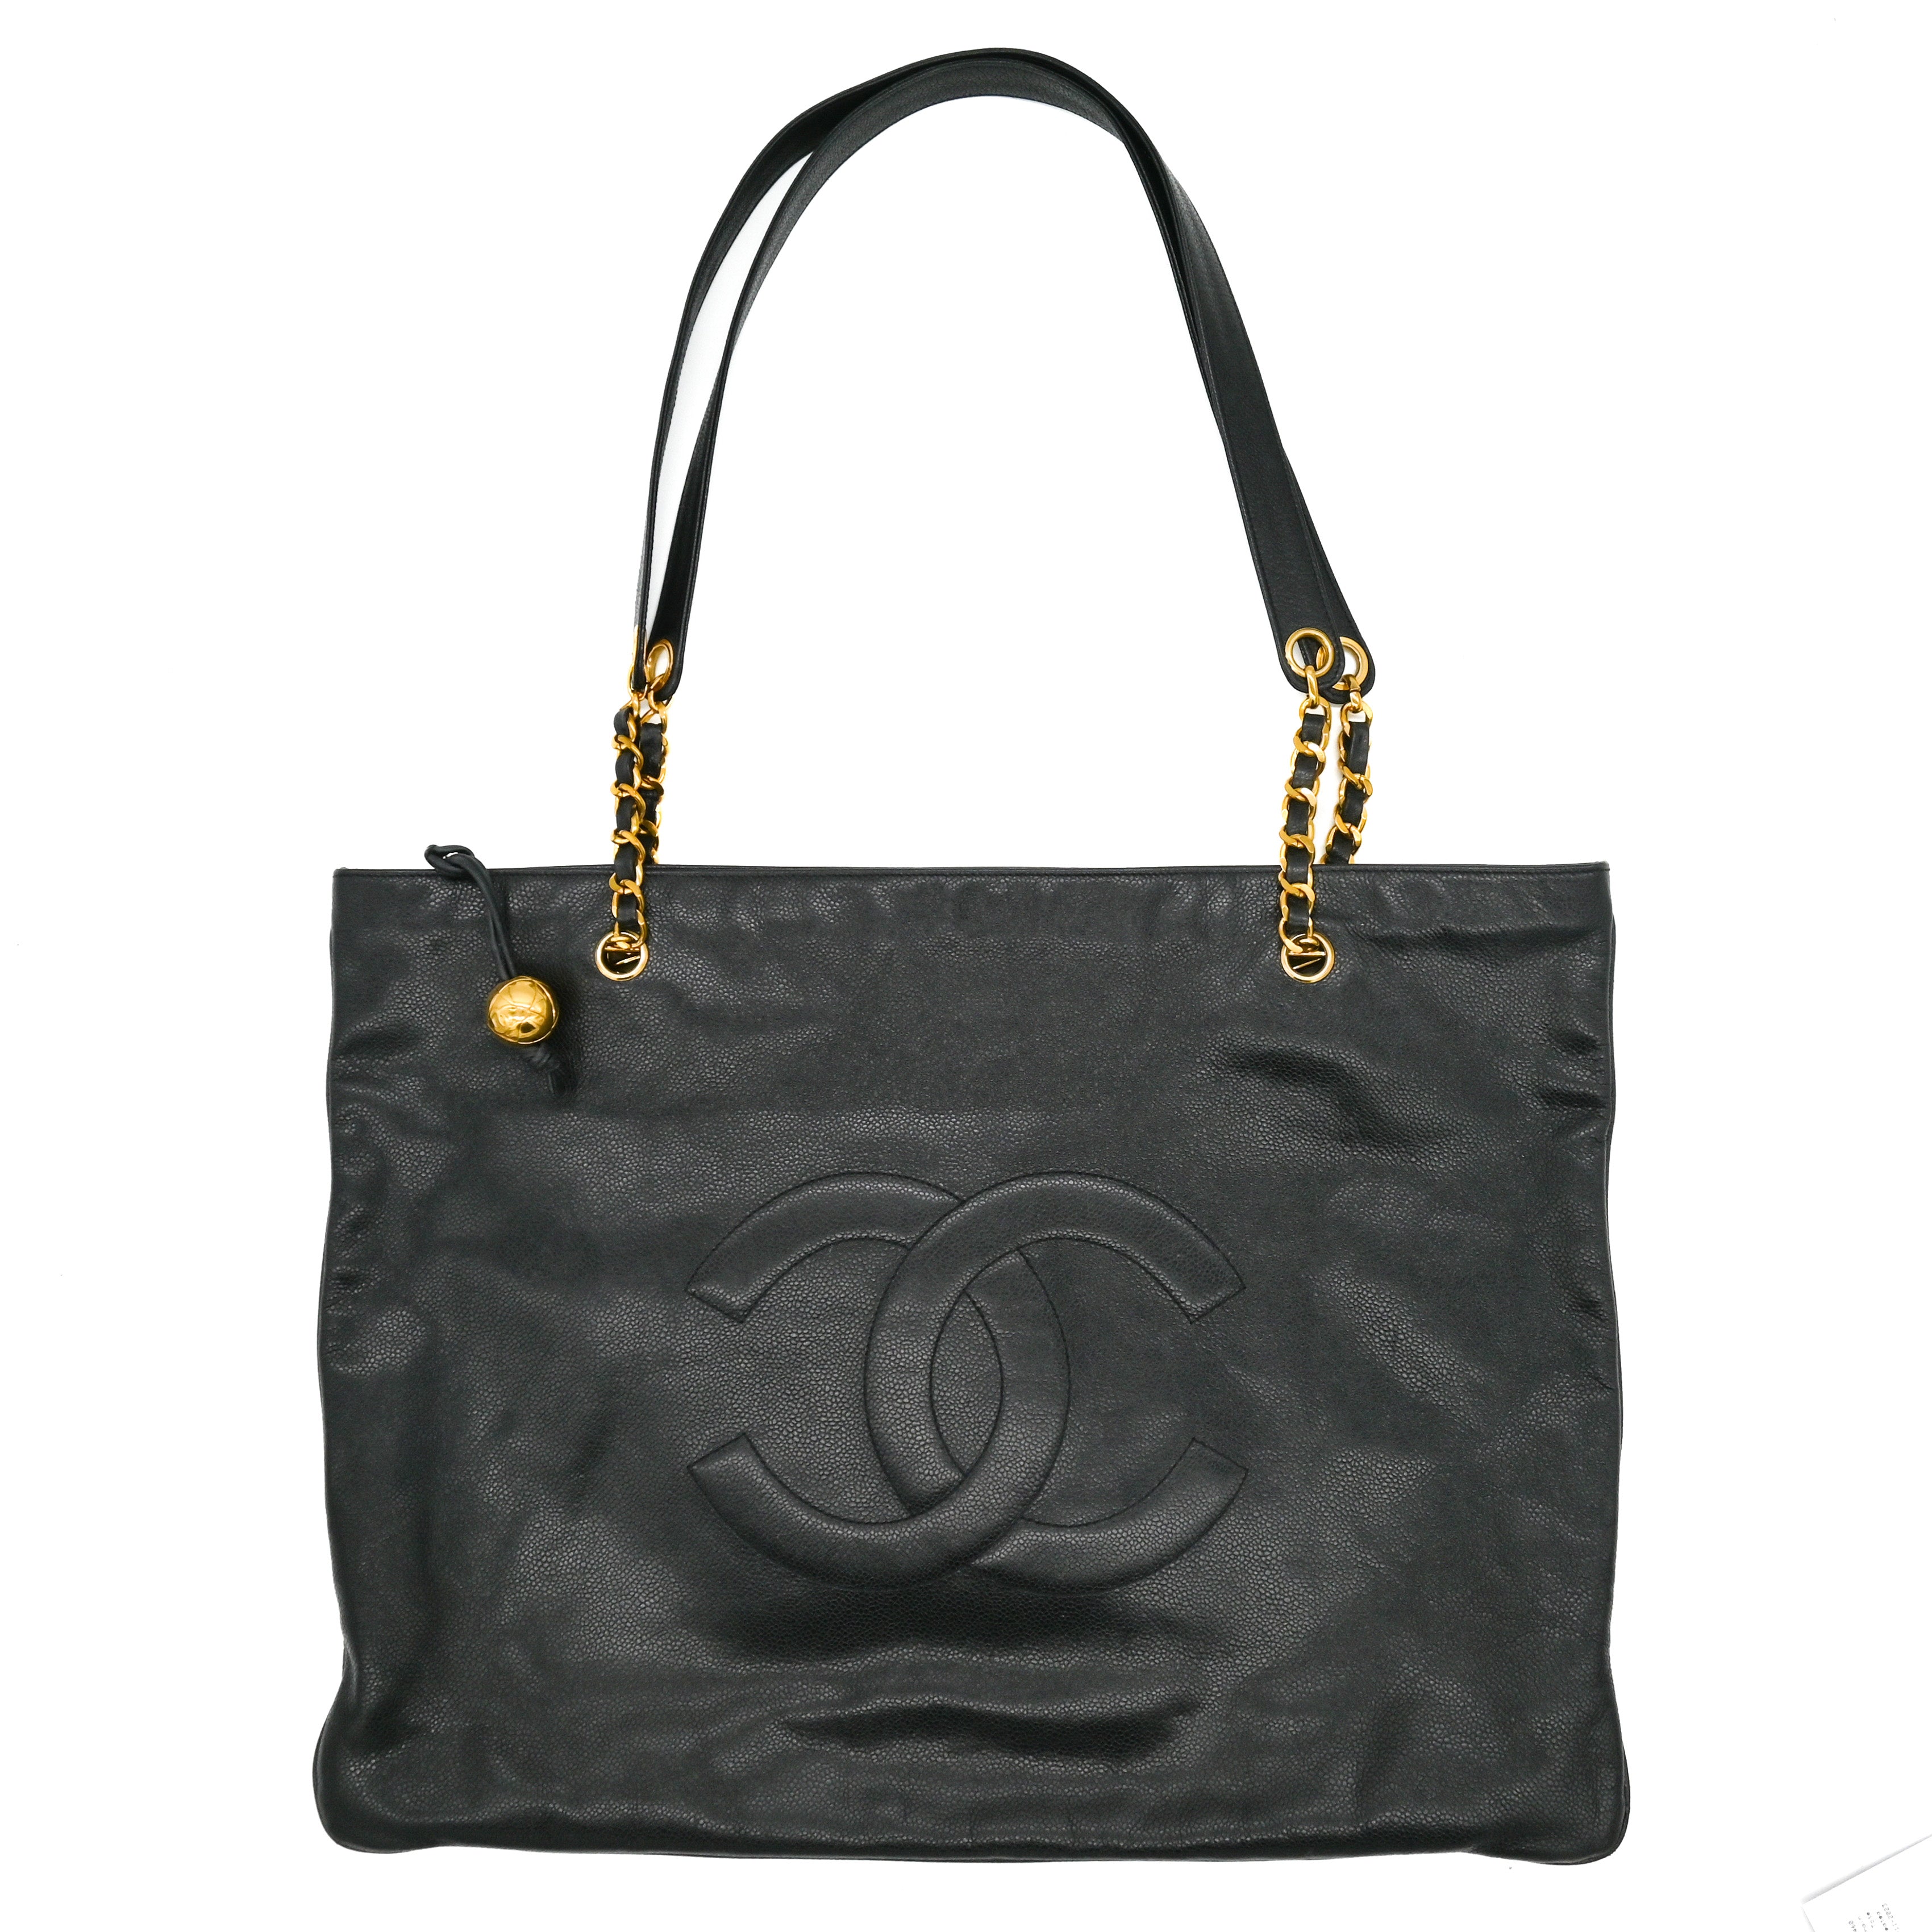 CHANEL Chanel Vintage CC Caviar Leather Extra Large Tote Bag - Vault 55